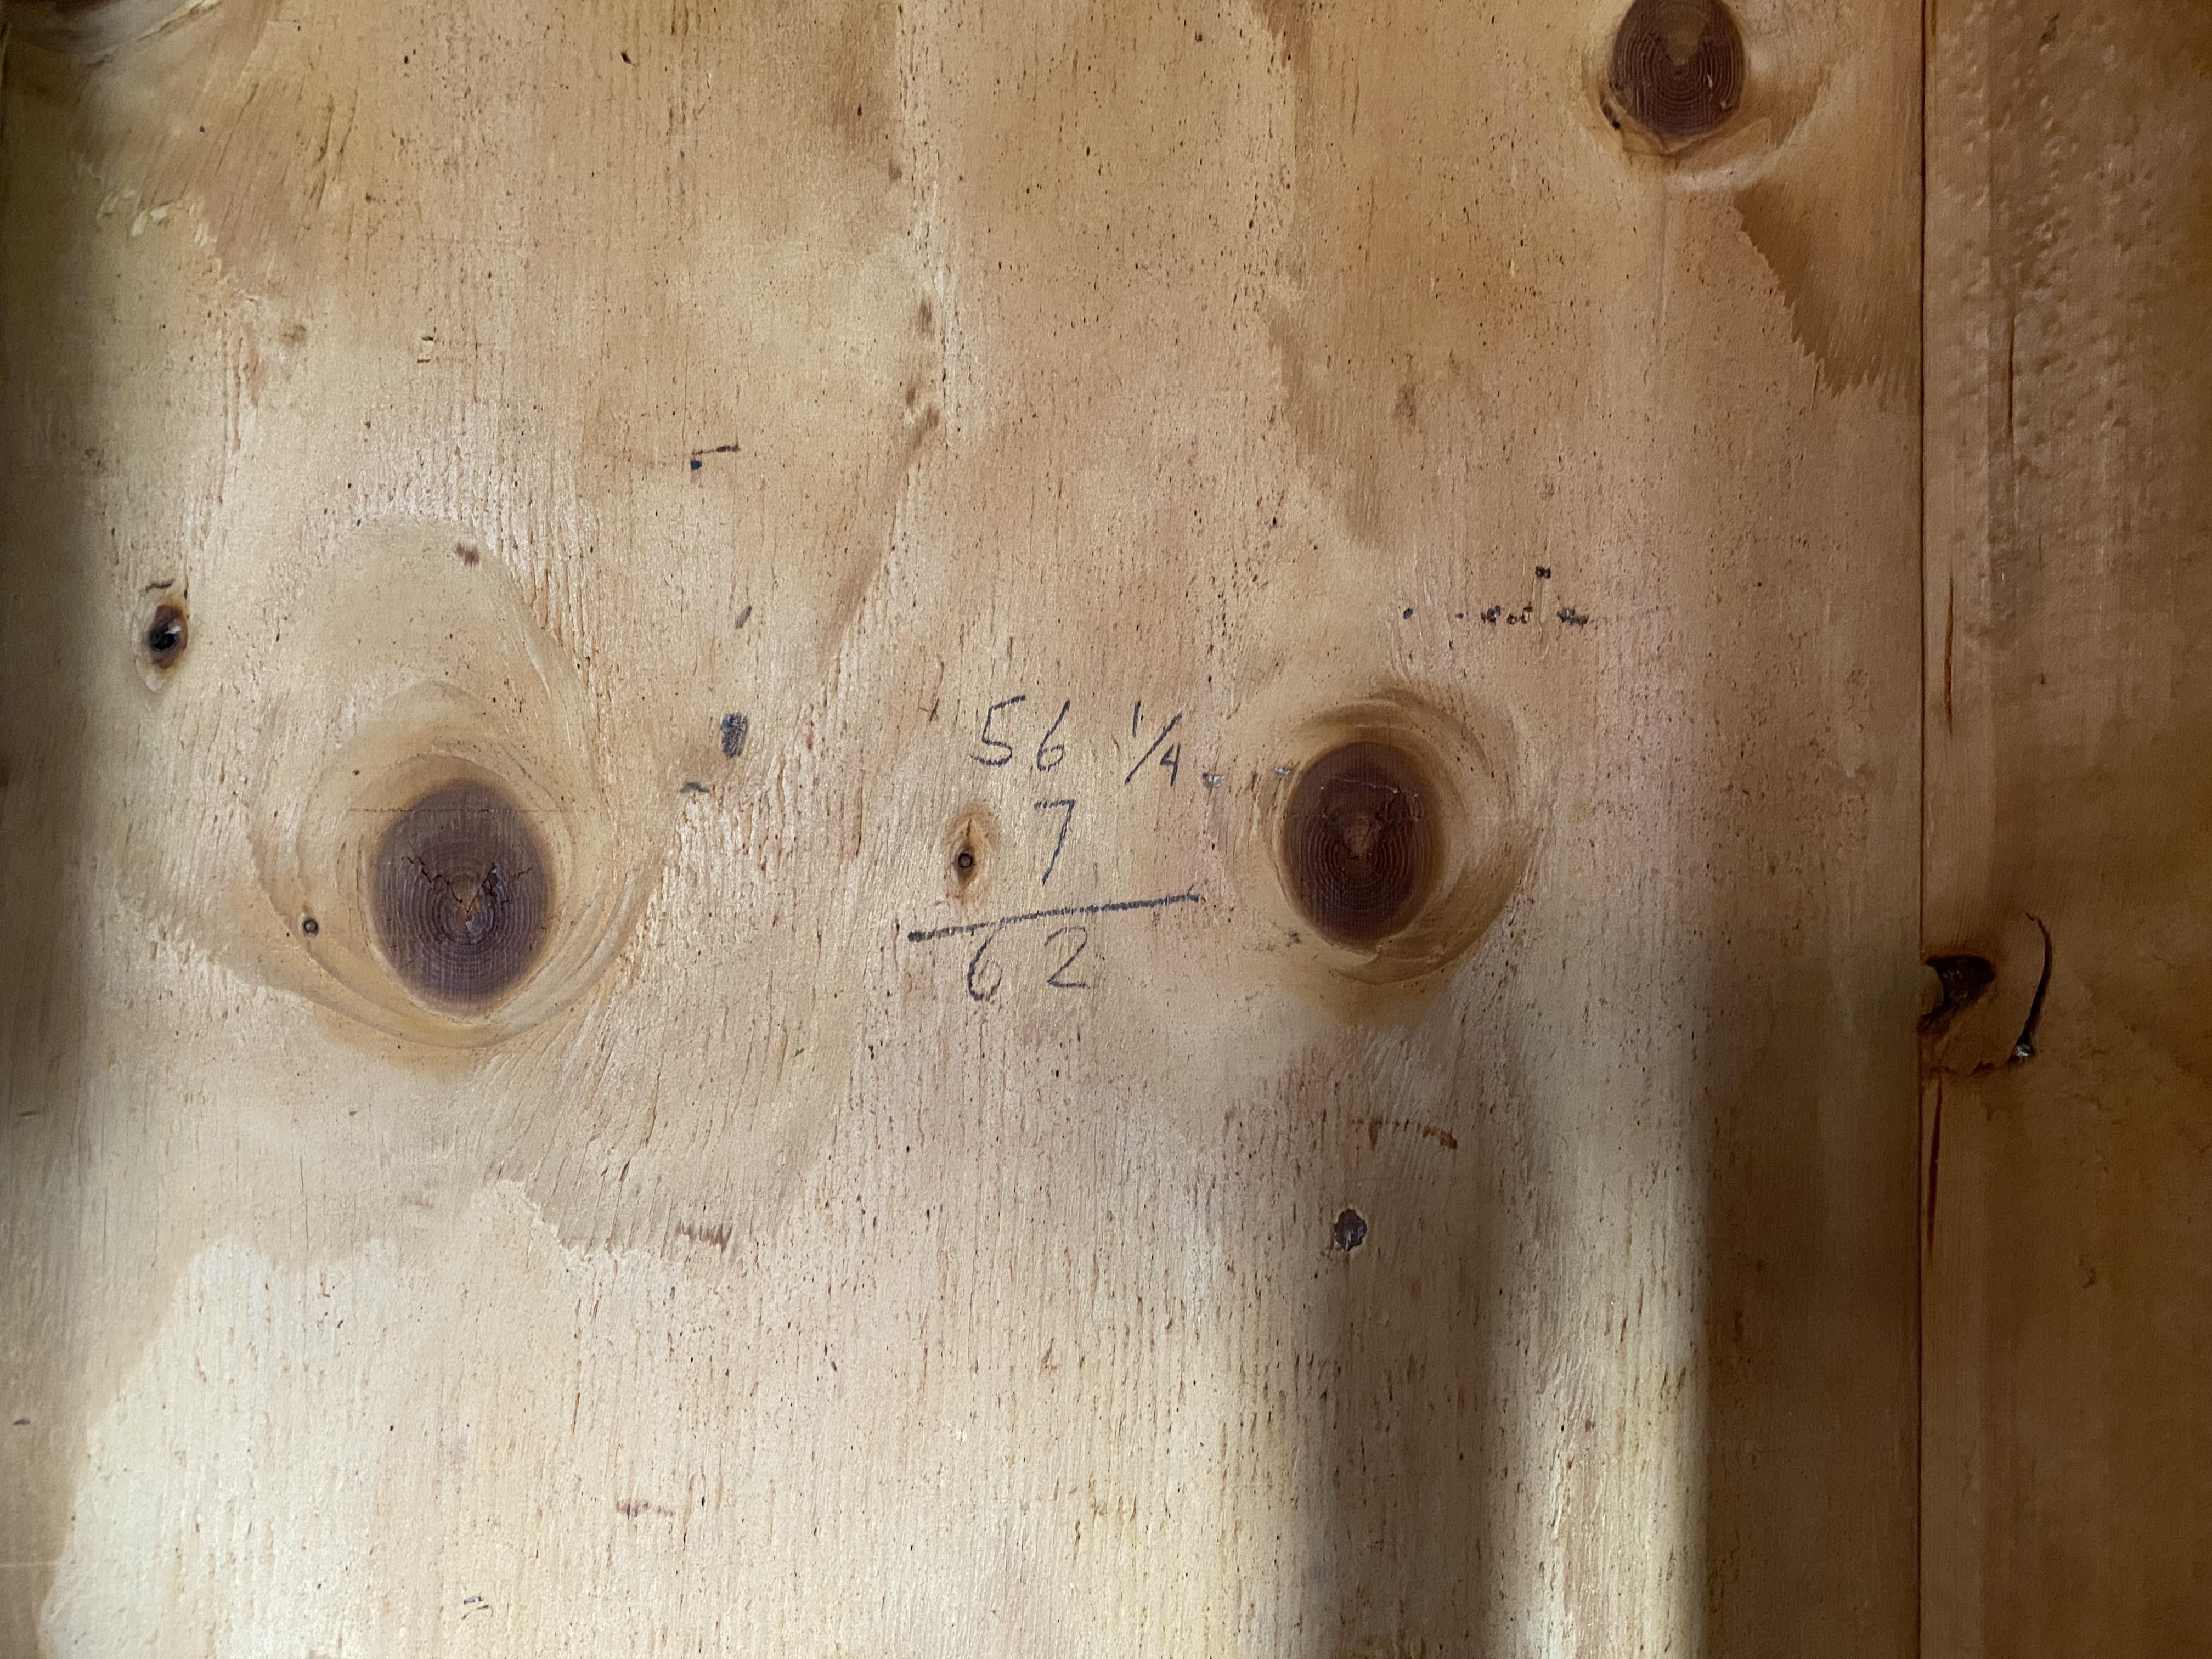 I found this calculation on my home’s construction materials and I gotta say, I’m a little concerned.